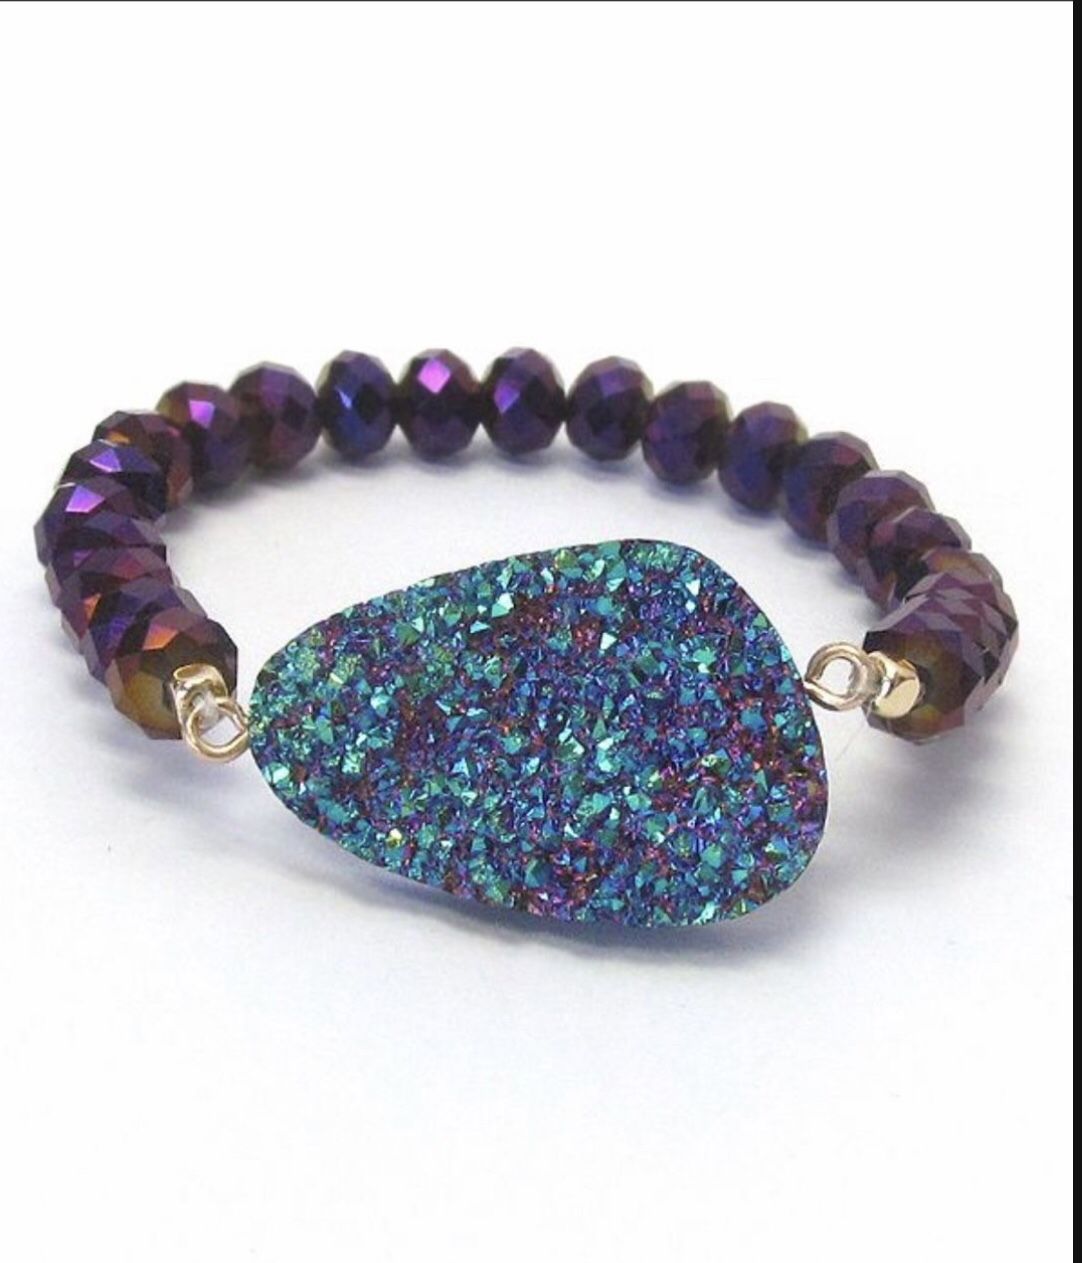 *SALE* Beautiful Druzy Irridescent Beads Stretch Bracelet. *See My Other 800 Items*